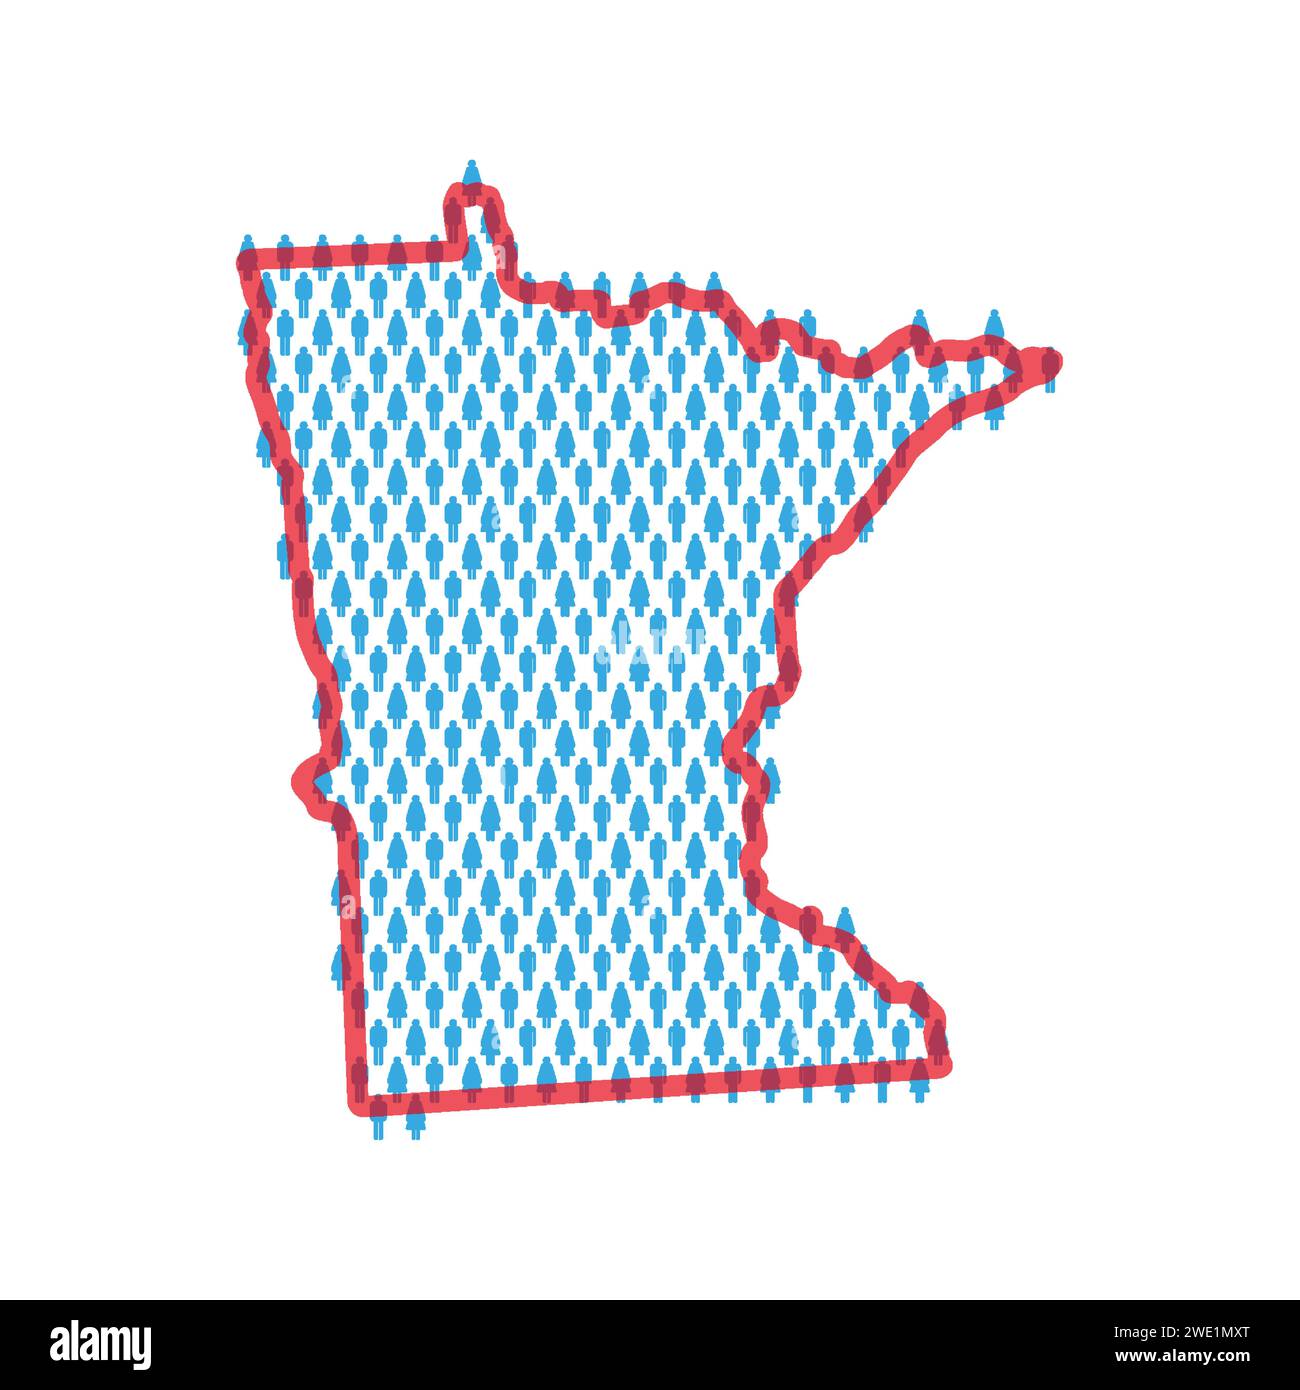 Minnesota population map. Stick figures people map with bold red translucent state border. Pattern of men and women icons. Isolated vector illustratio Stock Vector